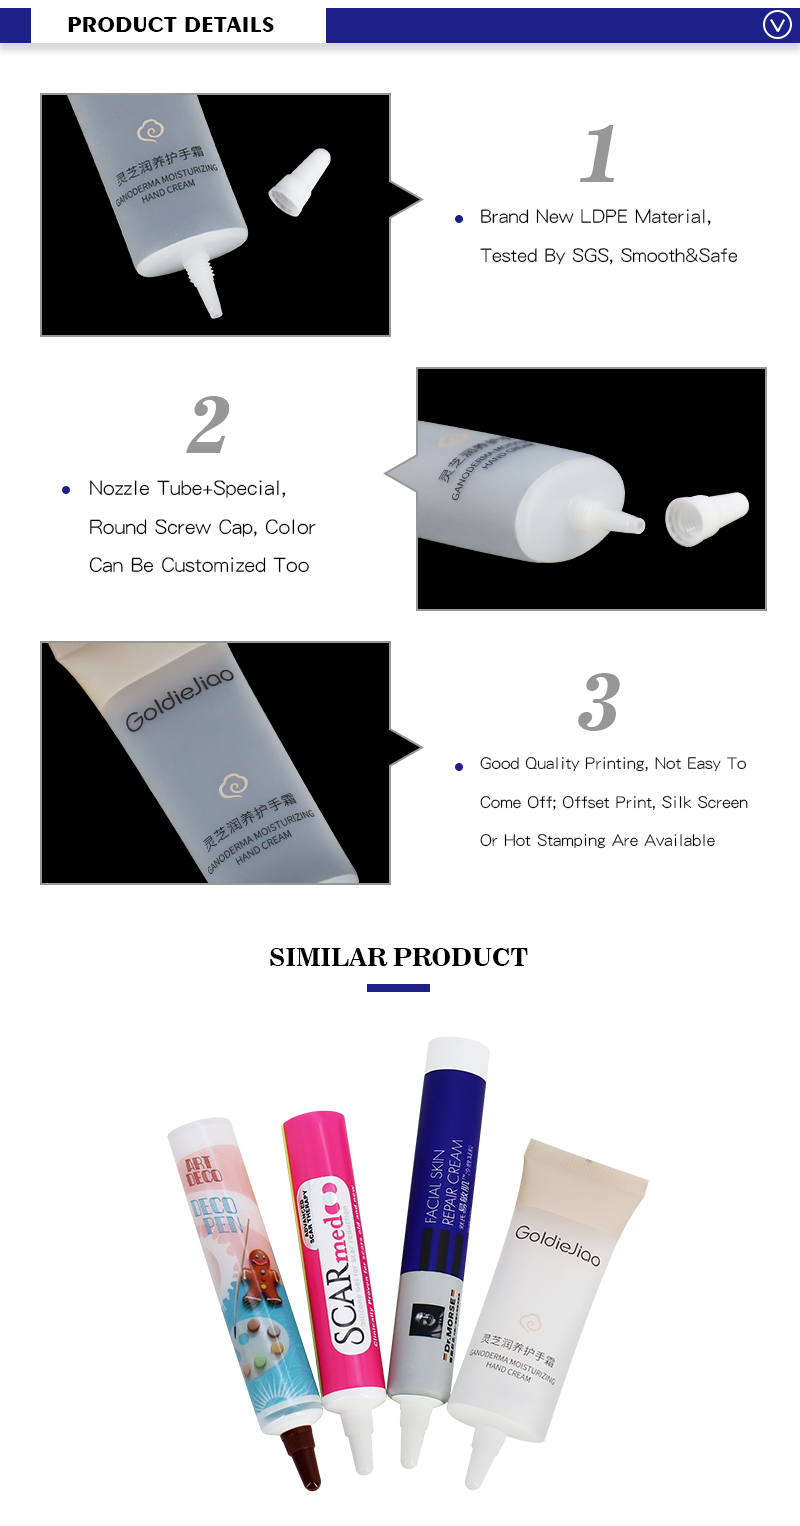 Transparent Empty Cosmetic Container Hand Cream Tube 50g